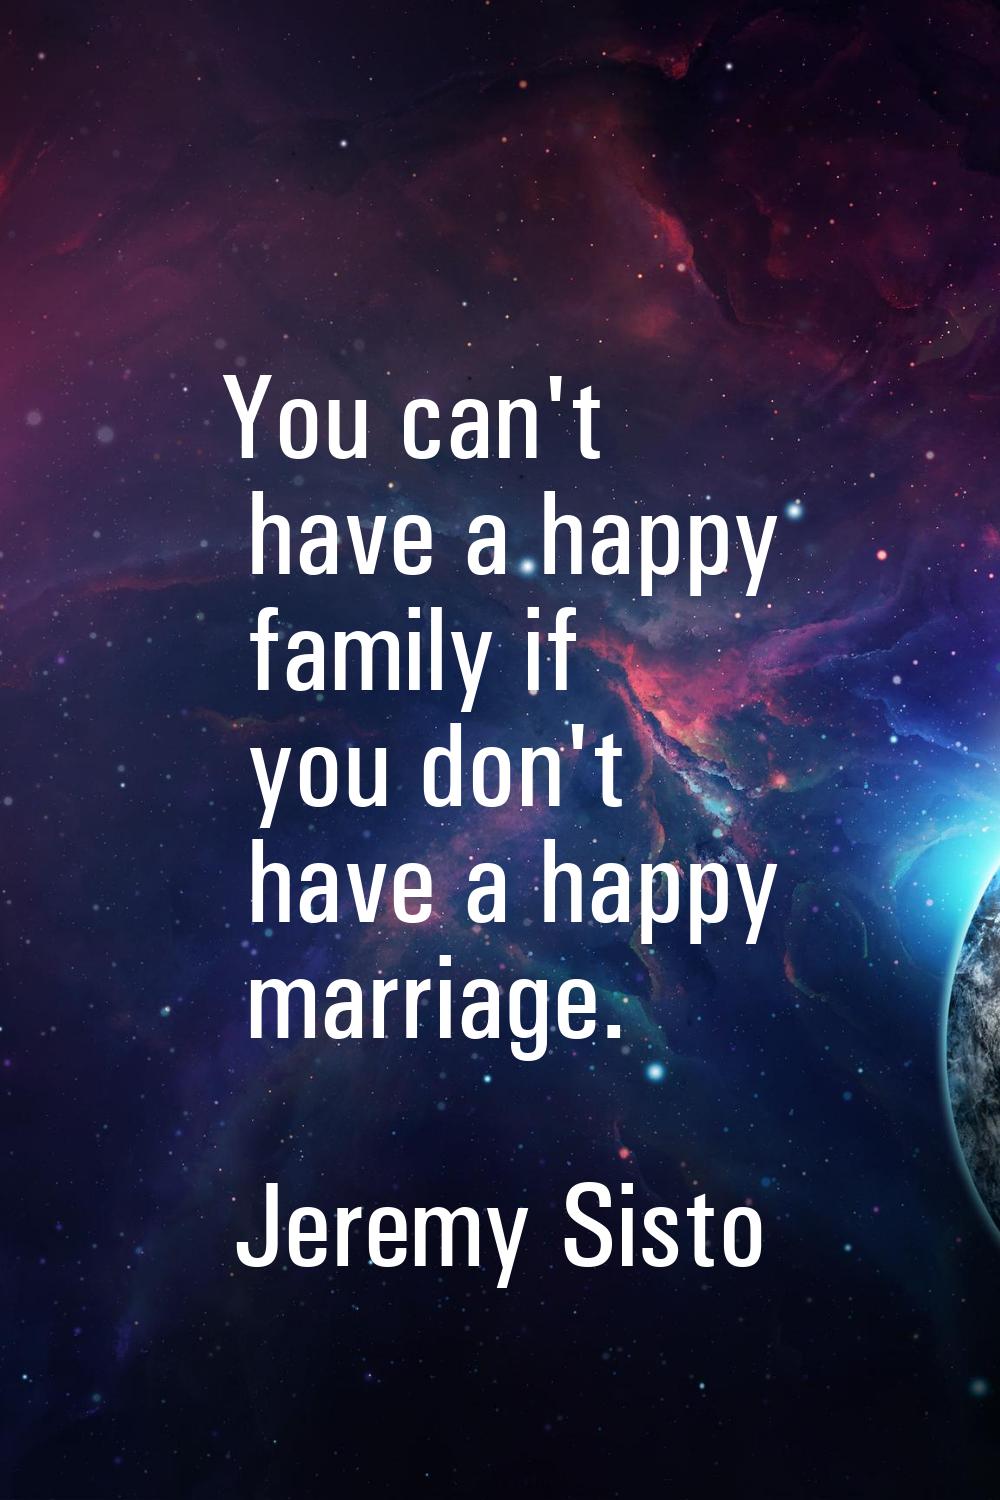 You can't have a happy family if you don't have a happy marriage.